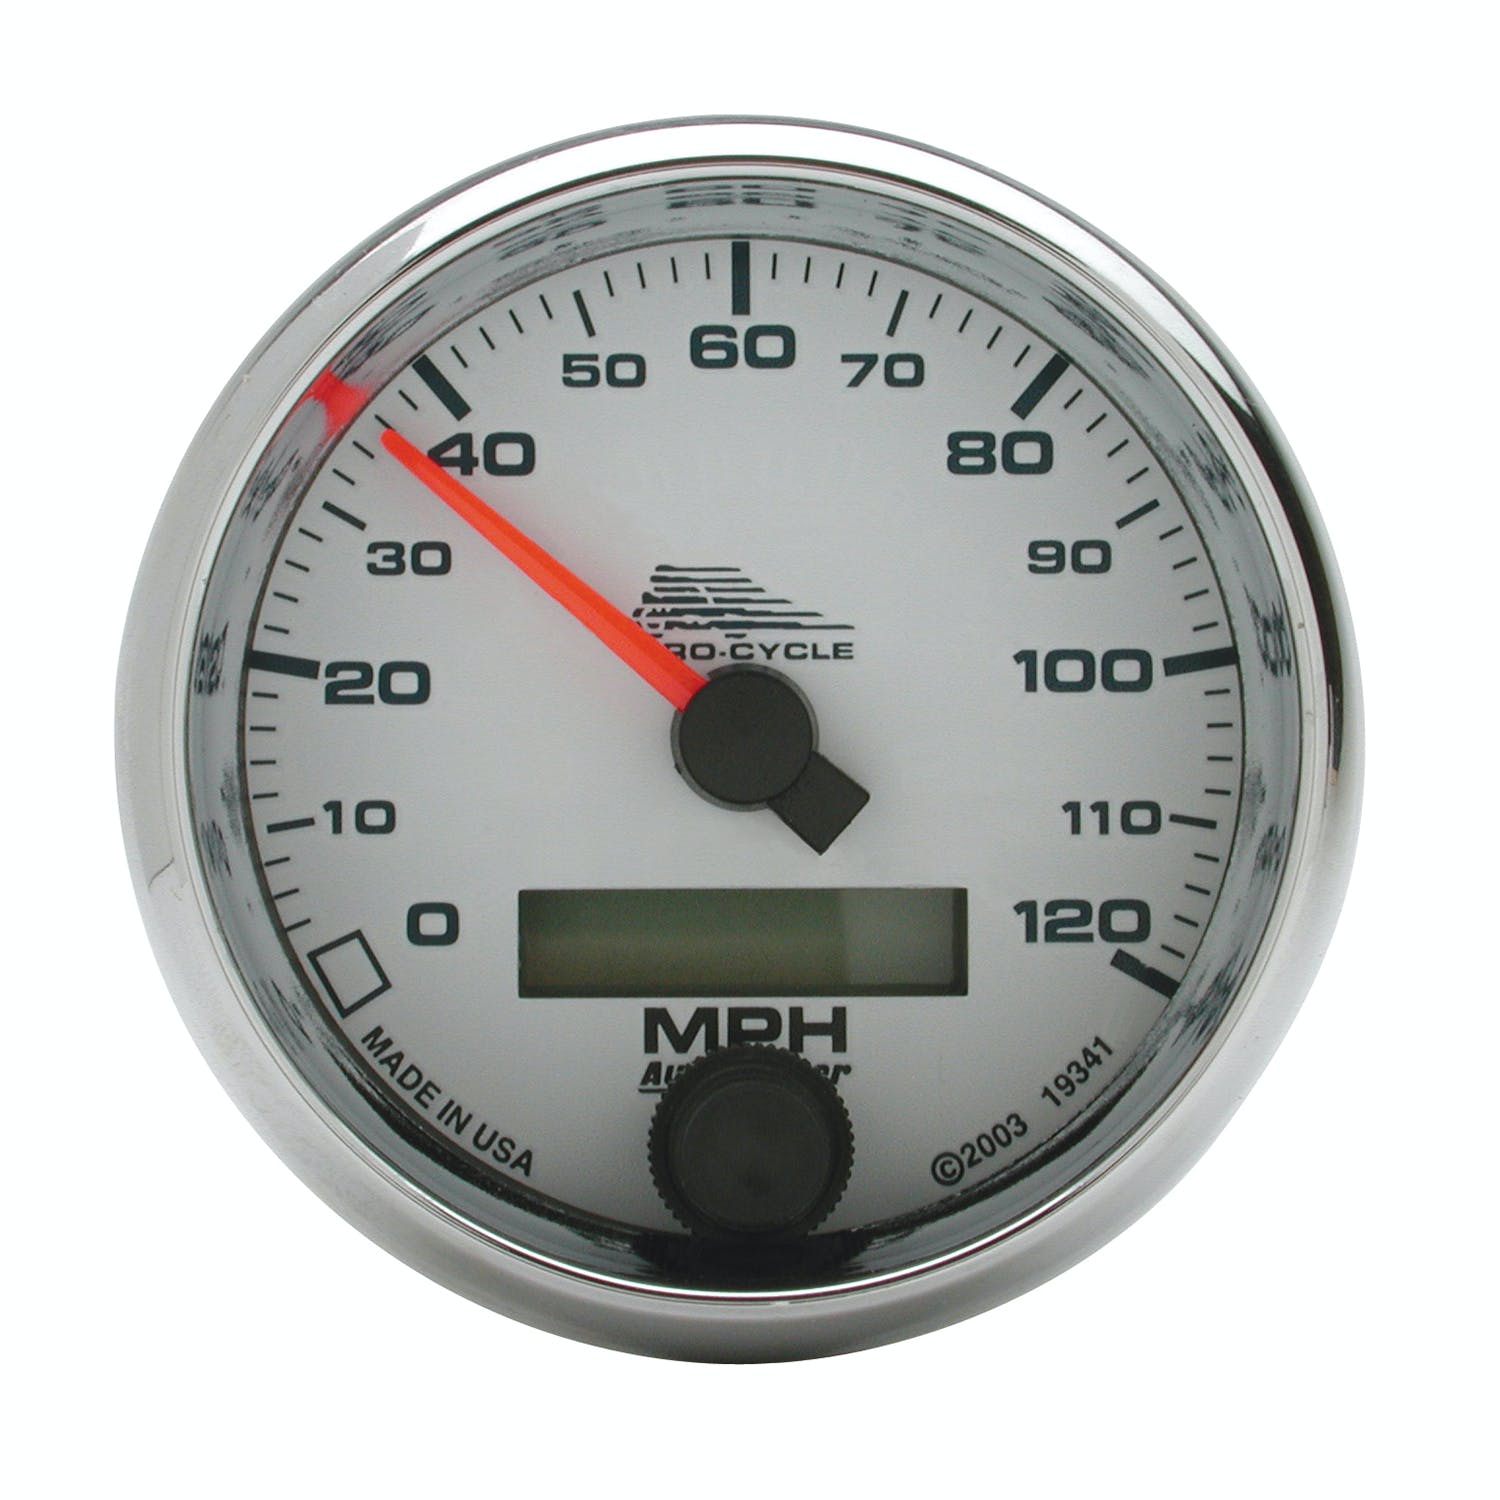 AutoMeter Products 19341 Speedometer Gauge, Electric White-Pro Cycle 2 5/8, 120 MPH